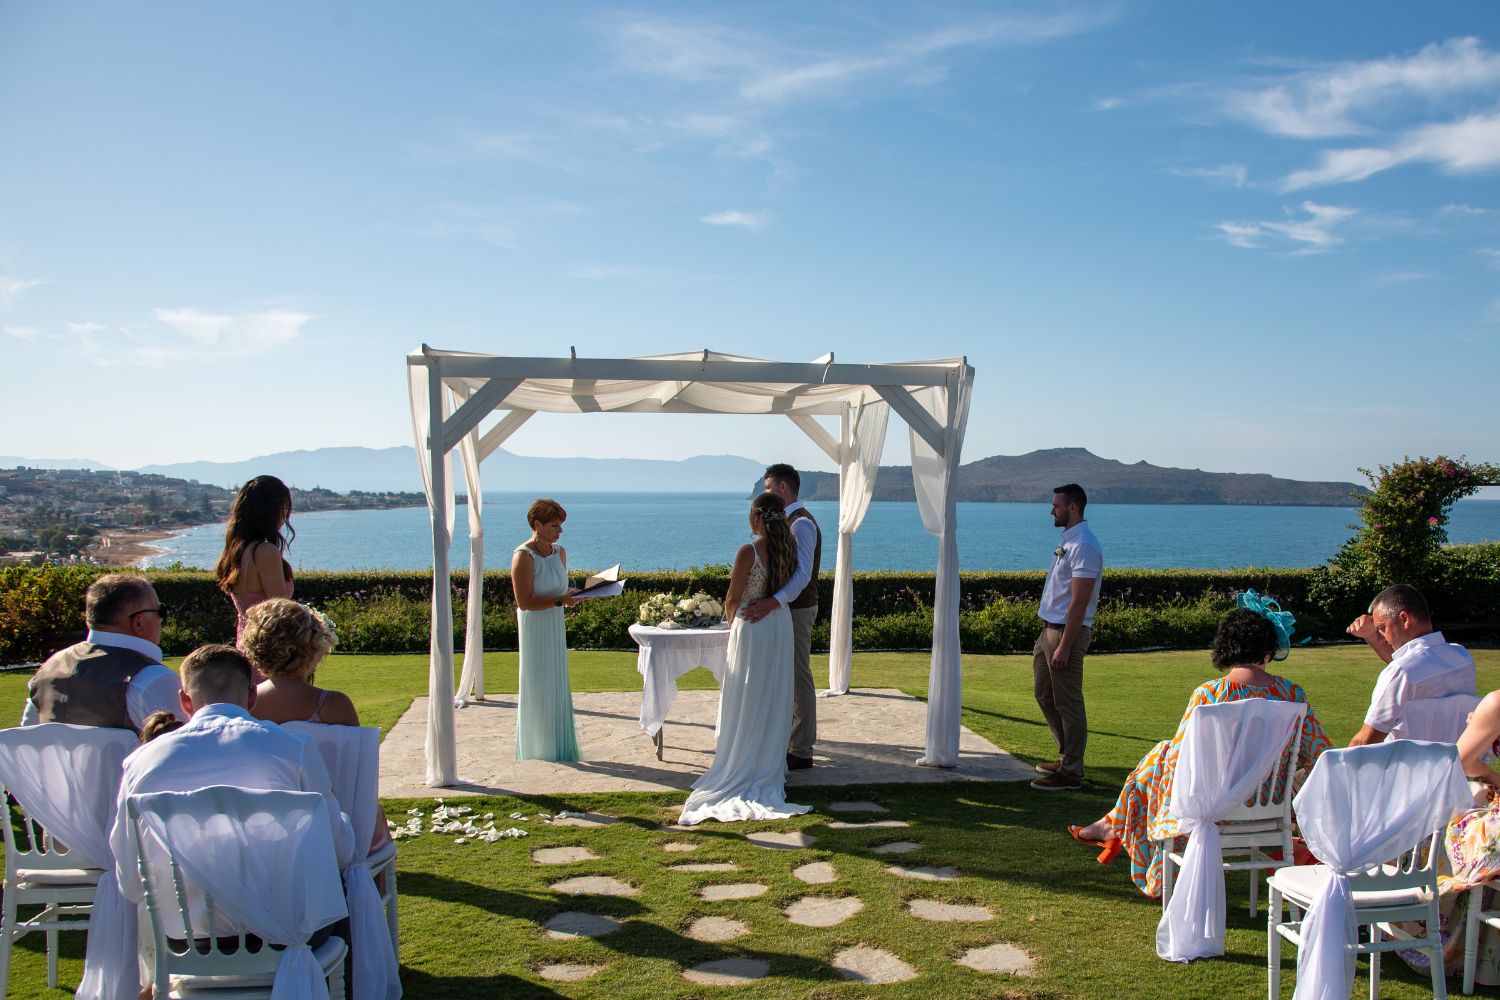 Contact us to book a beautiful wedding in Chania